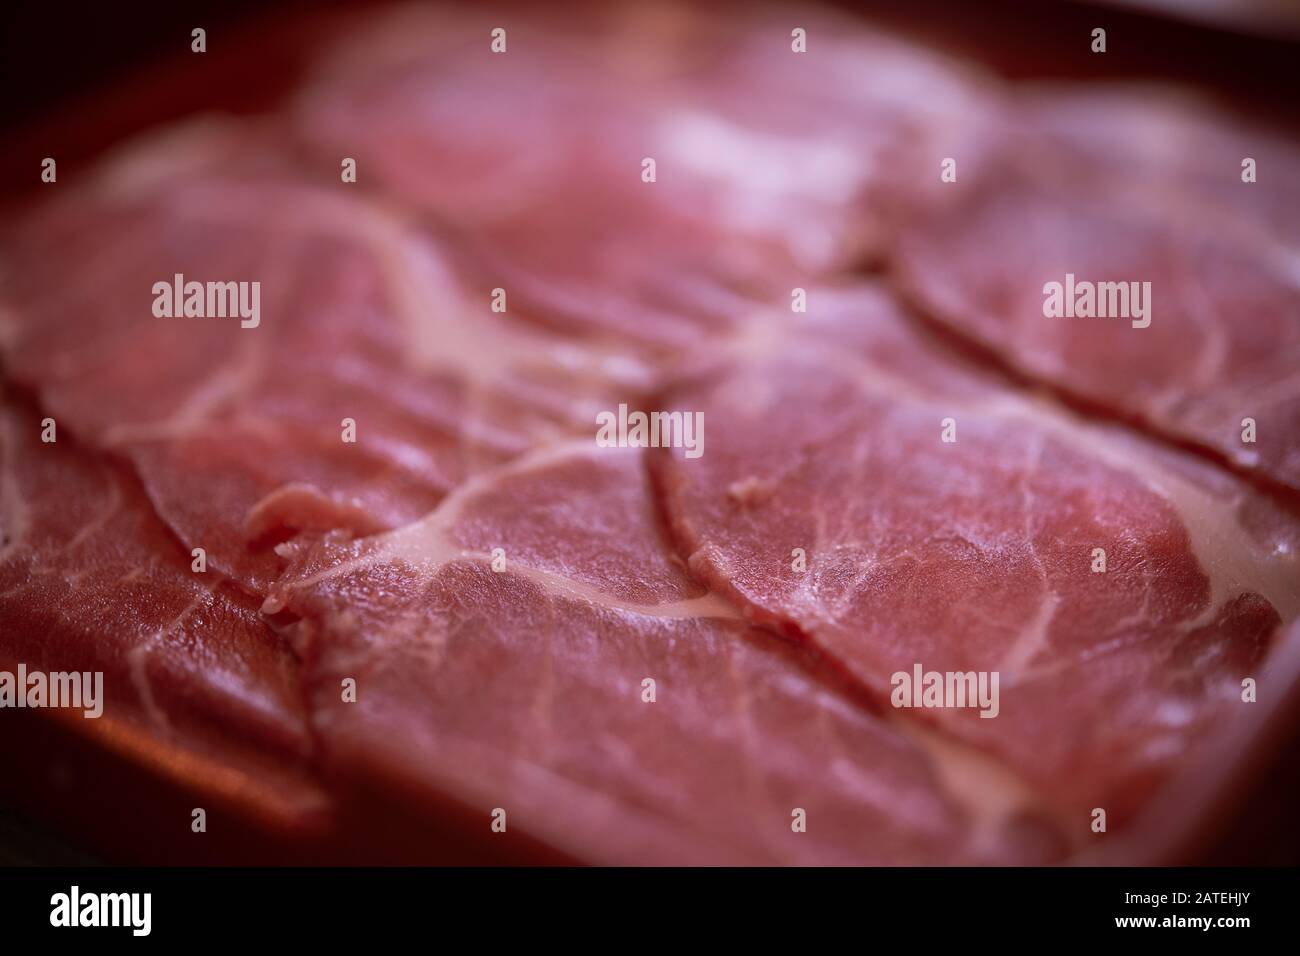 Raw pork meat slices on plate Stock Photo